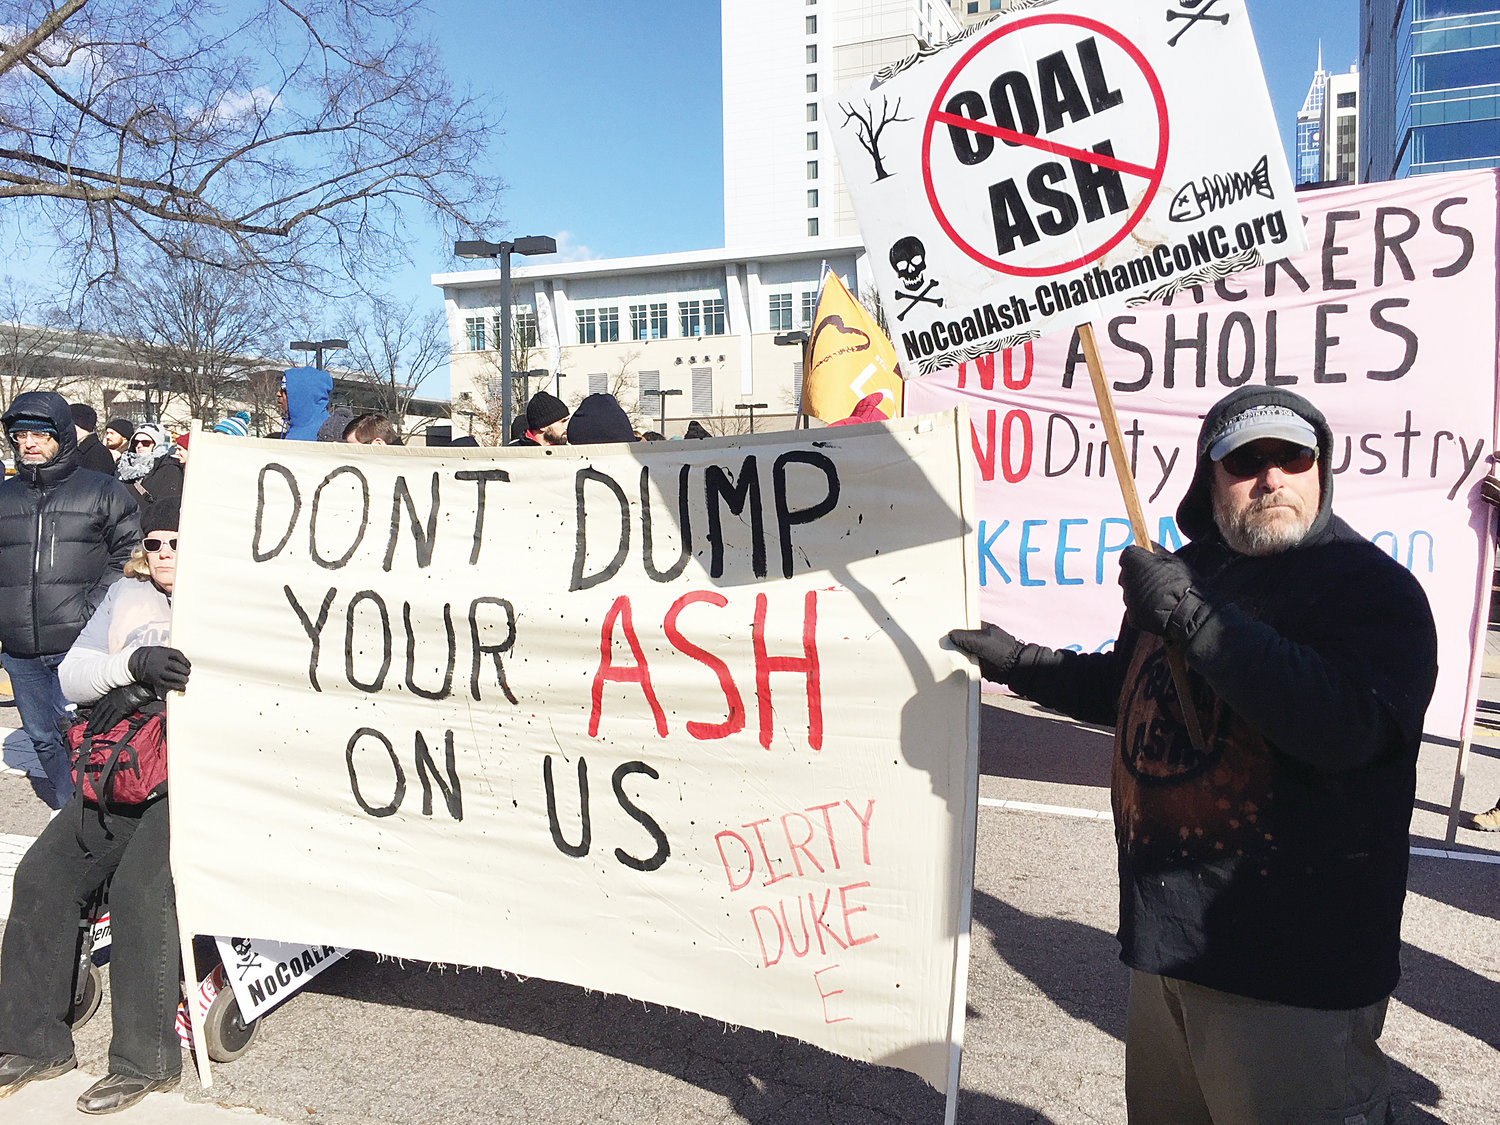 Opposition to the coal ash site at Brickhaven filed lawsuits to prevent the operation. Here, a group of activists protest coal ash at the annual HKonJ event in Raleigh.